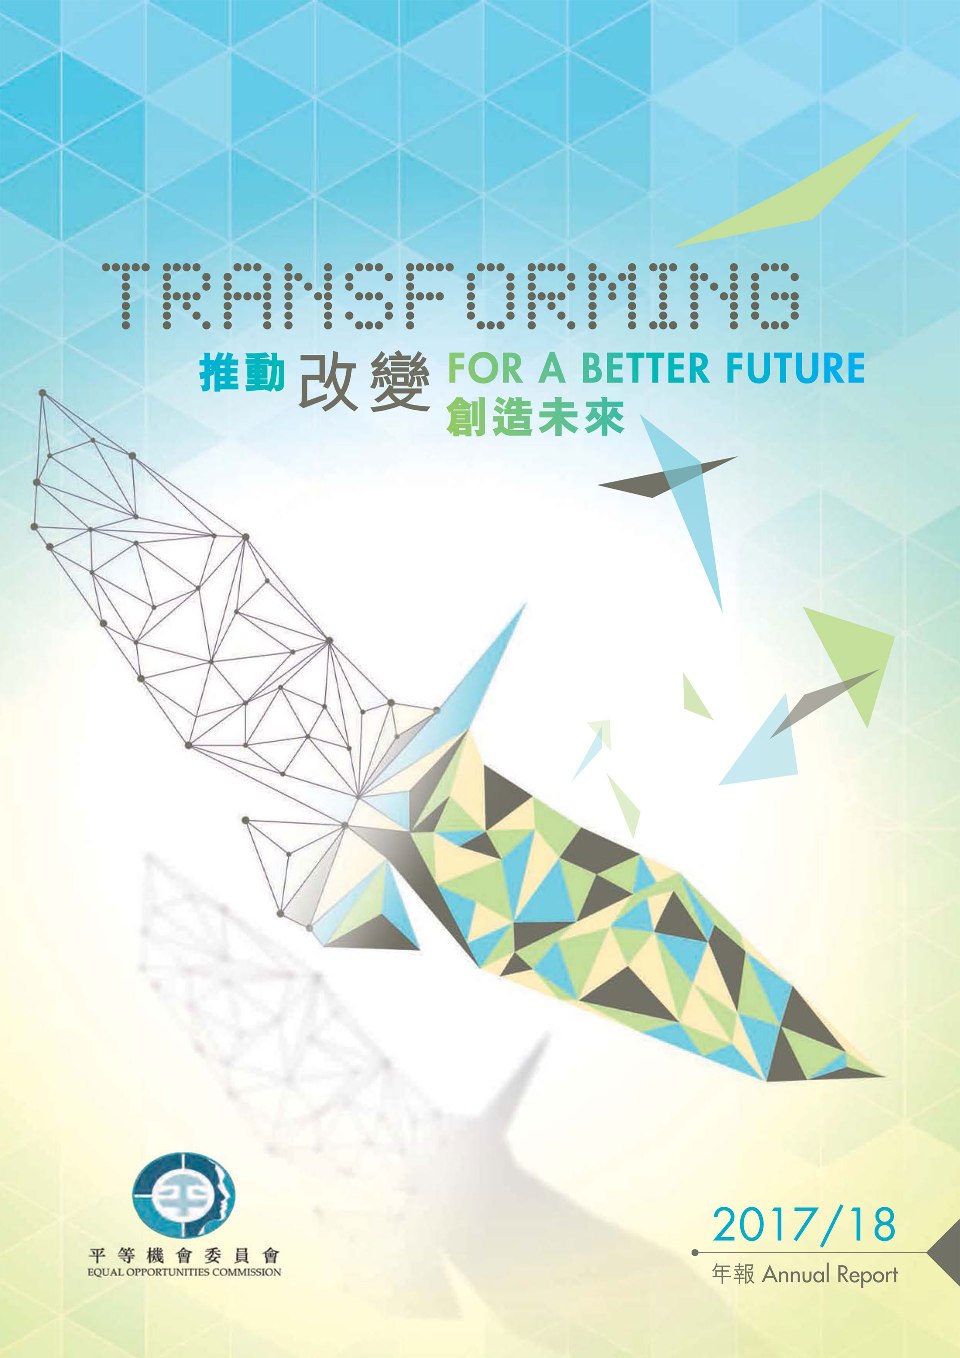 Cover of the EOC 2017/18 Annual Report, with triangular shades of blue and green forming into a bird spreading its wings